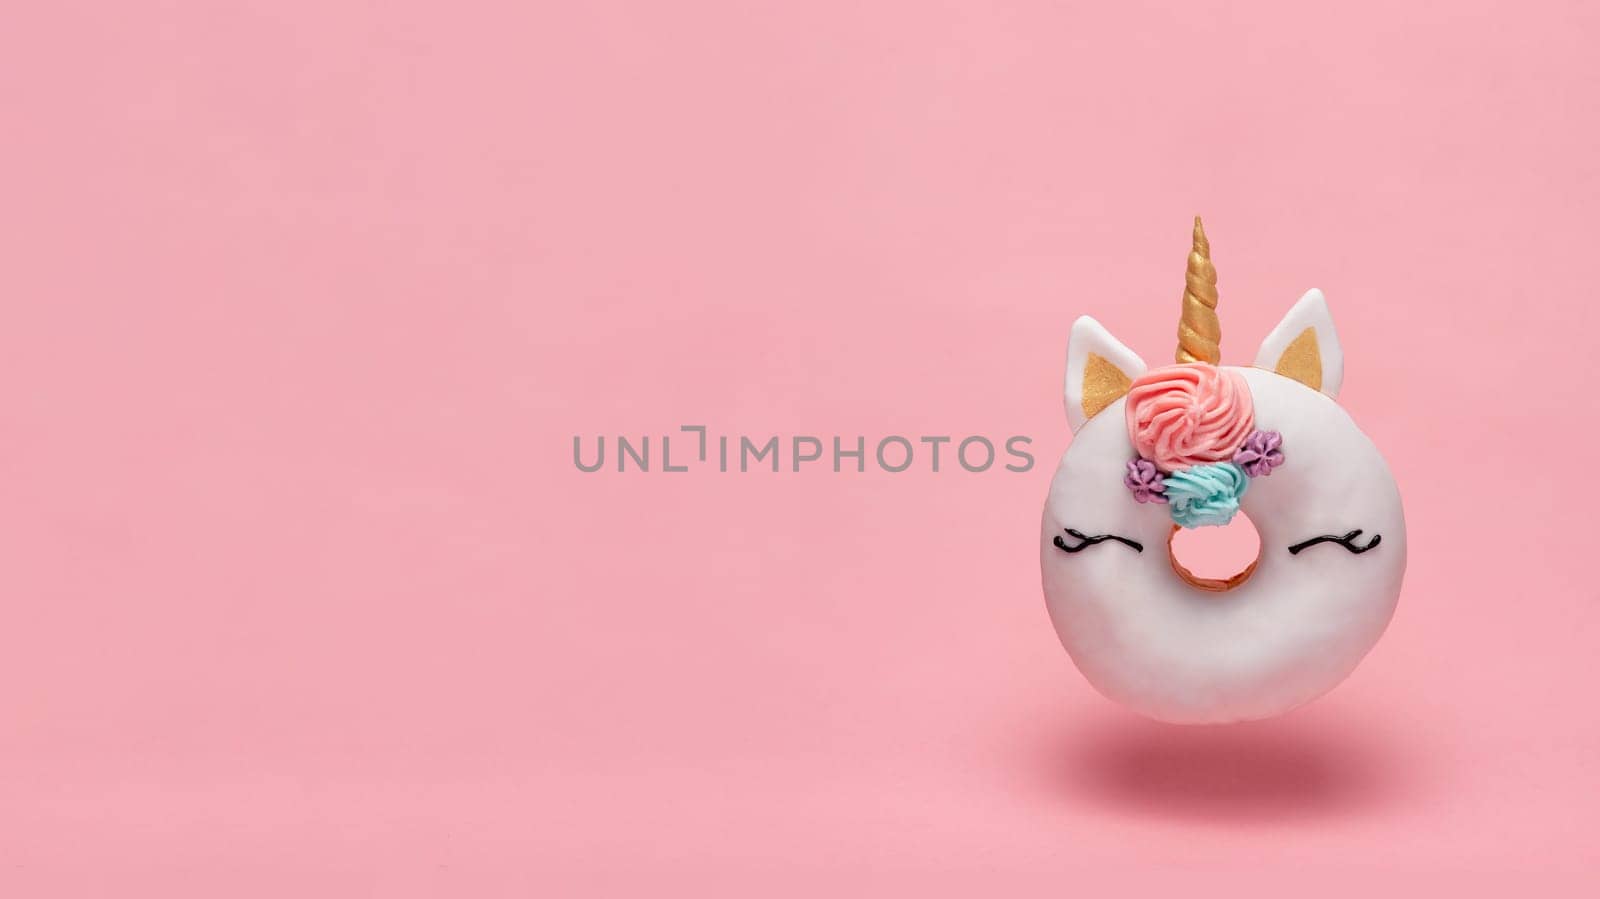 Unicorn donut hovers in air over pink background. Trendy donut unicorn with white glaze flying. Copy space for text.